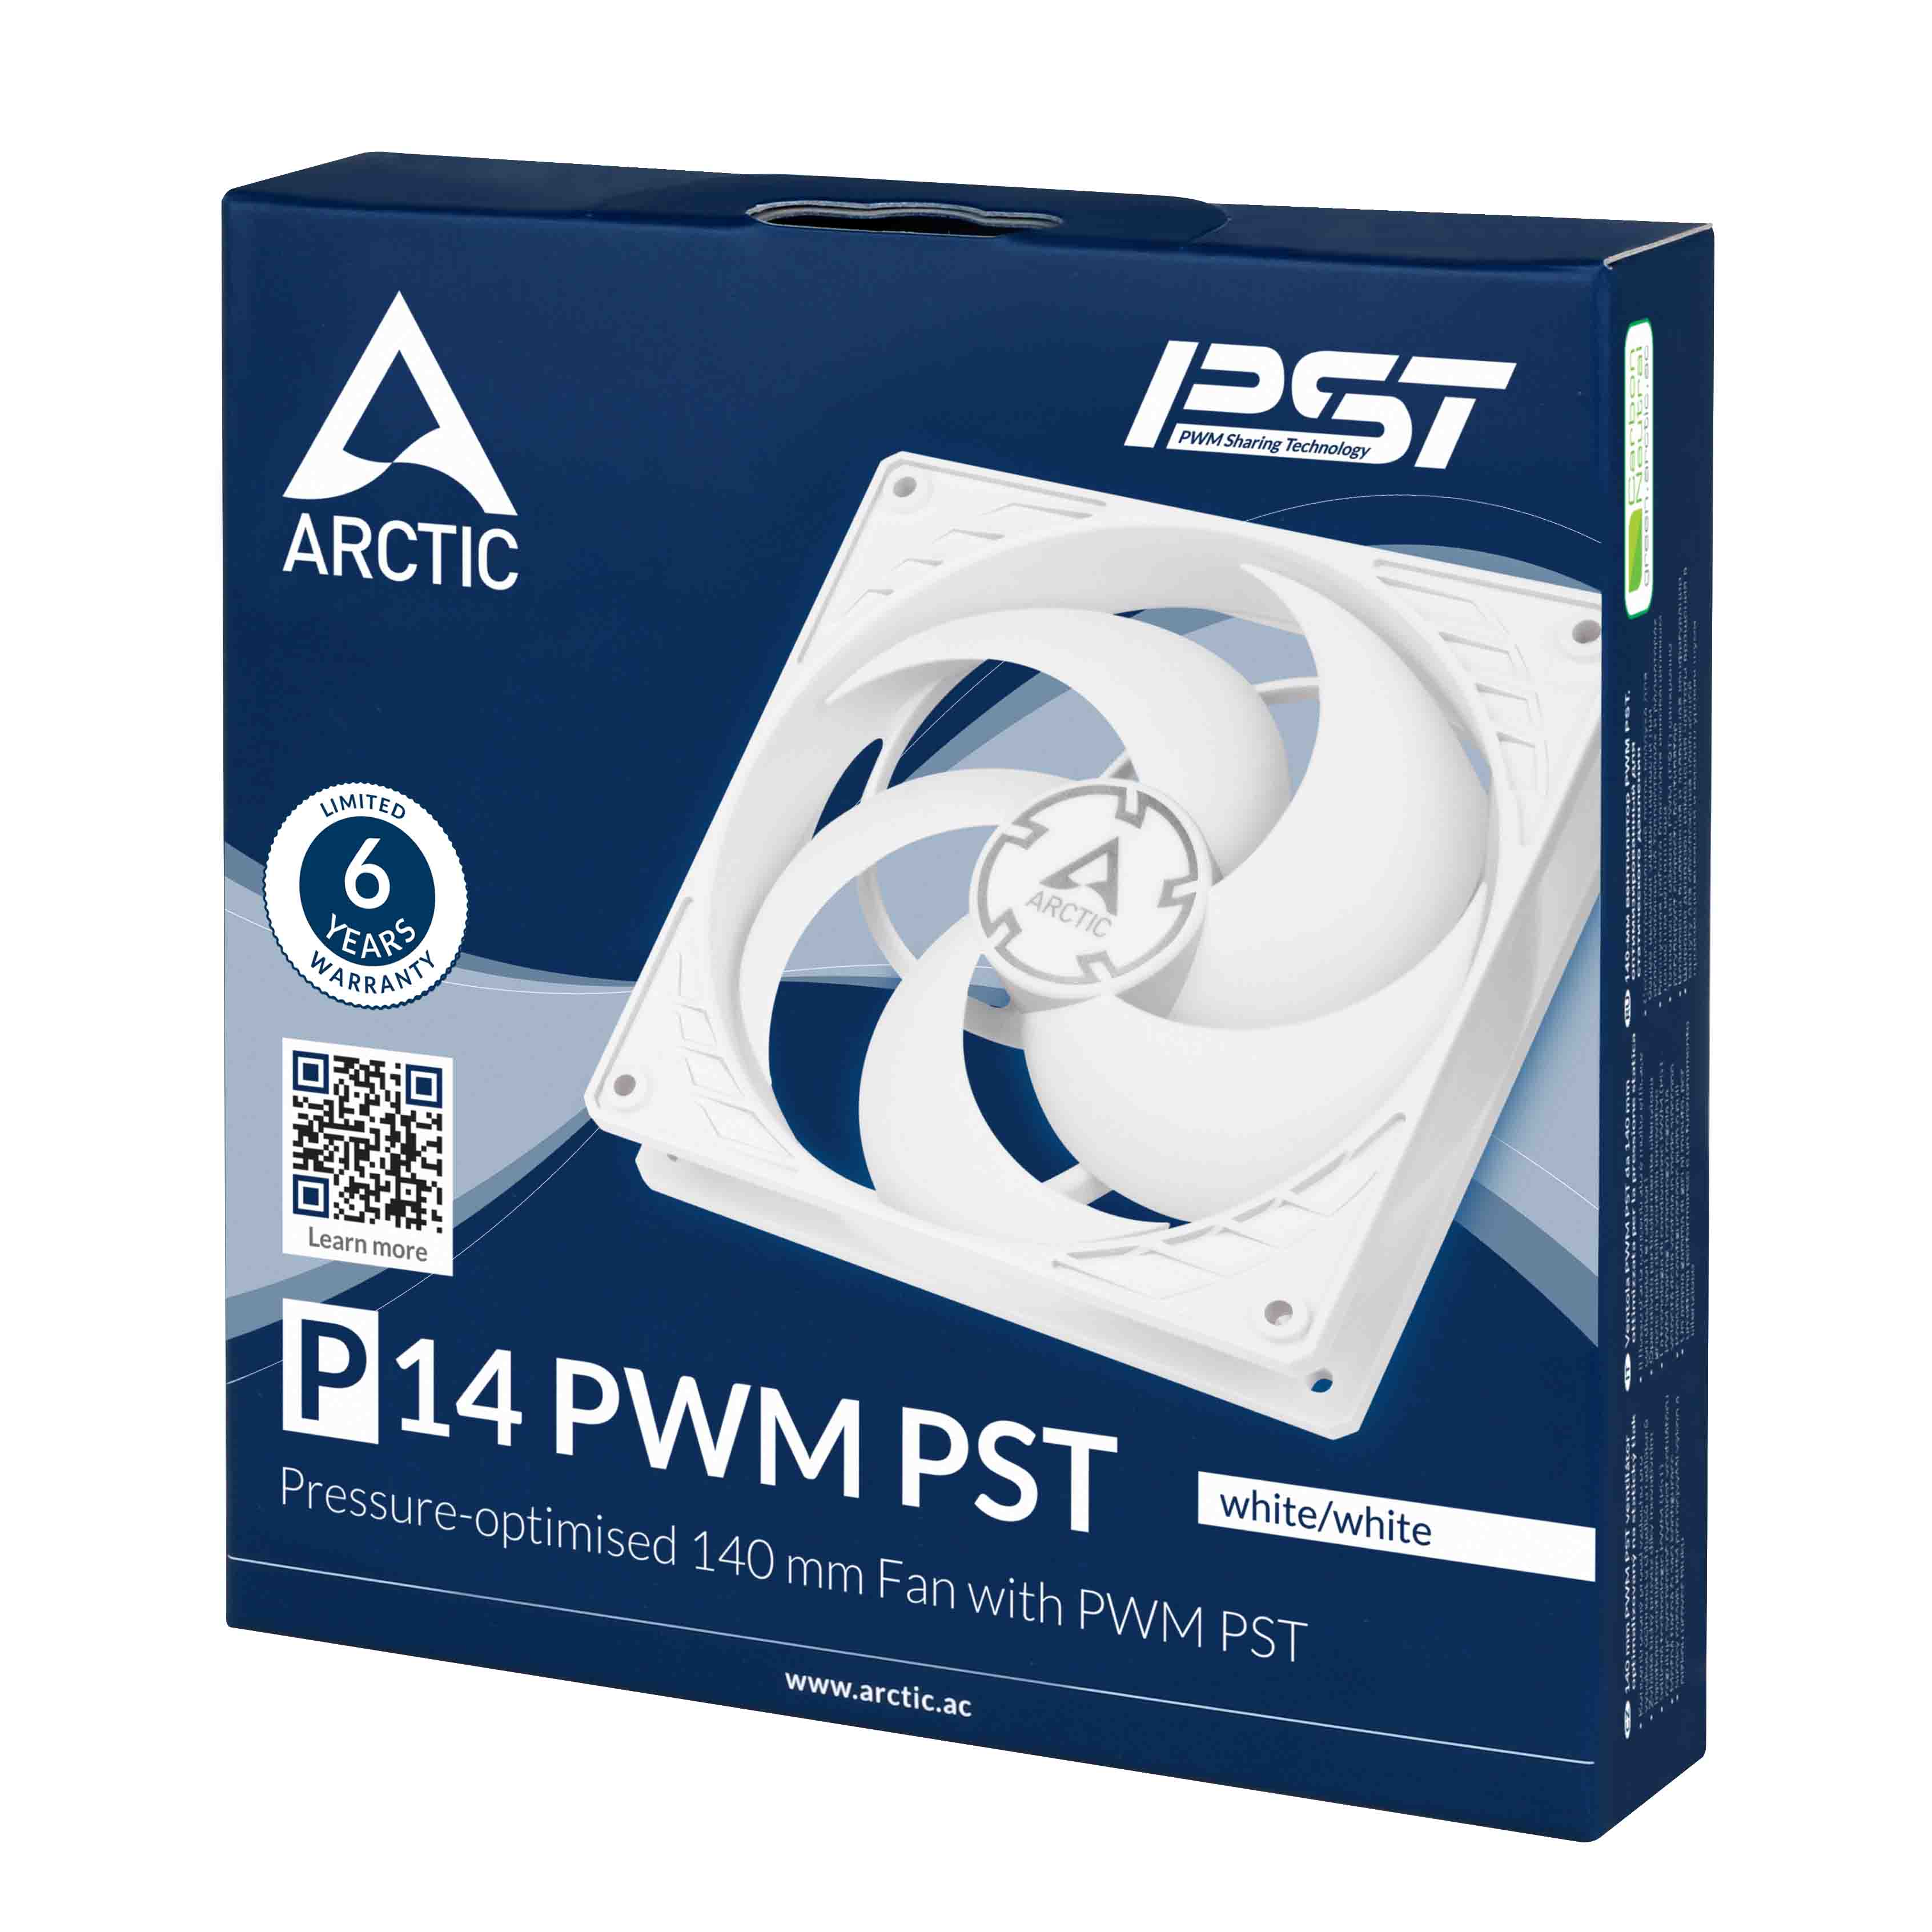 P14 PWM PST, 140 mm PWM Fan with Cable Splitter